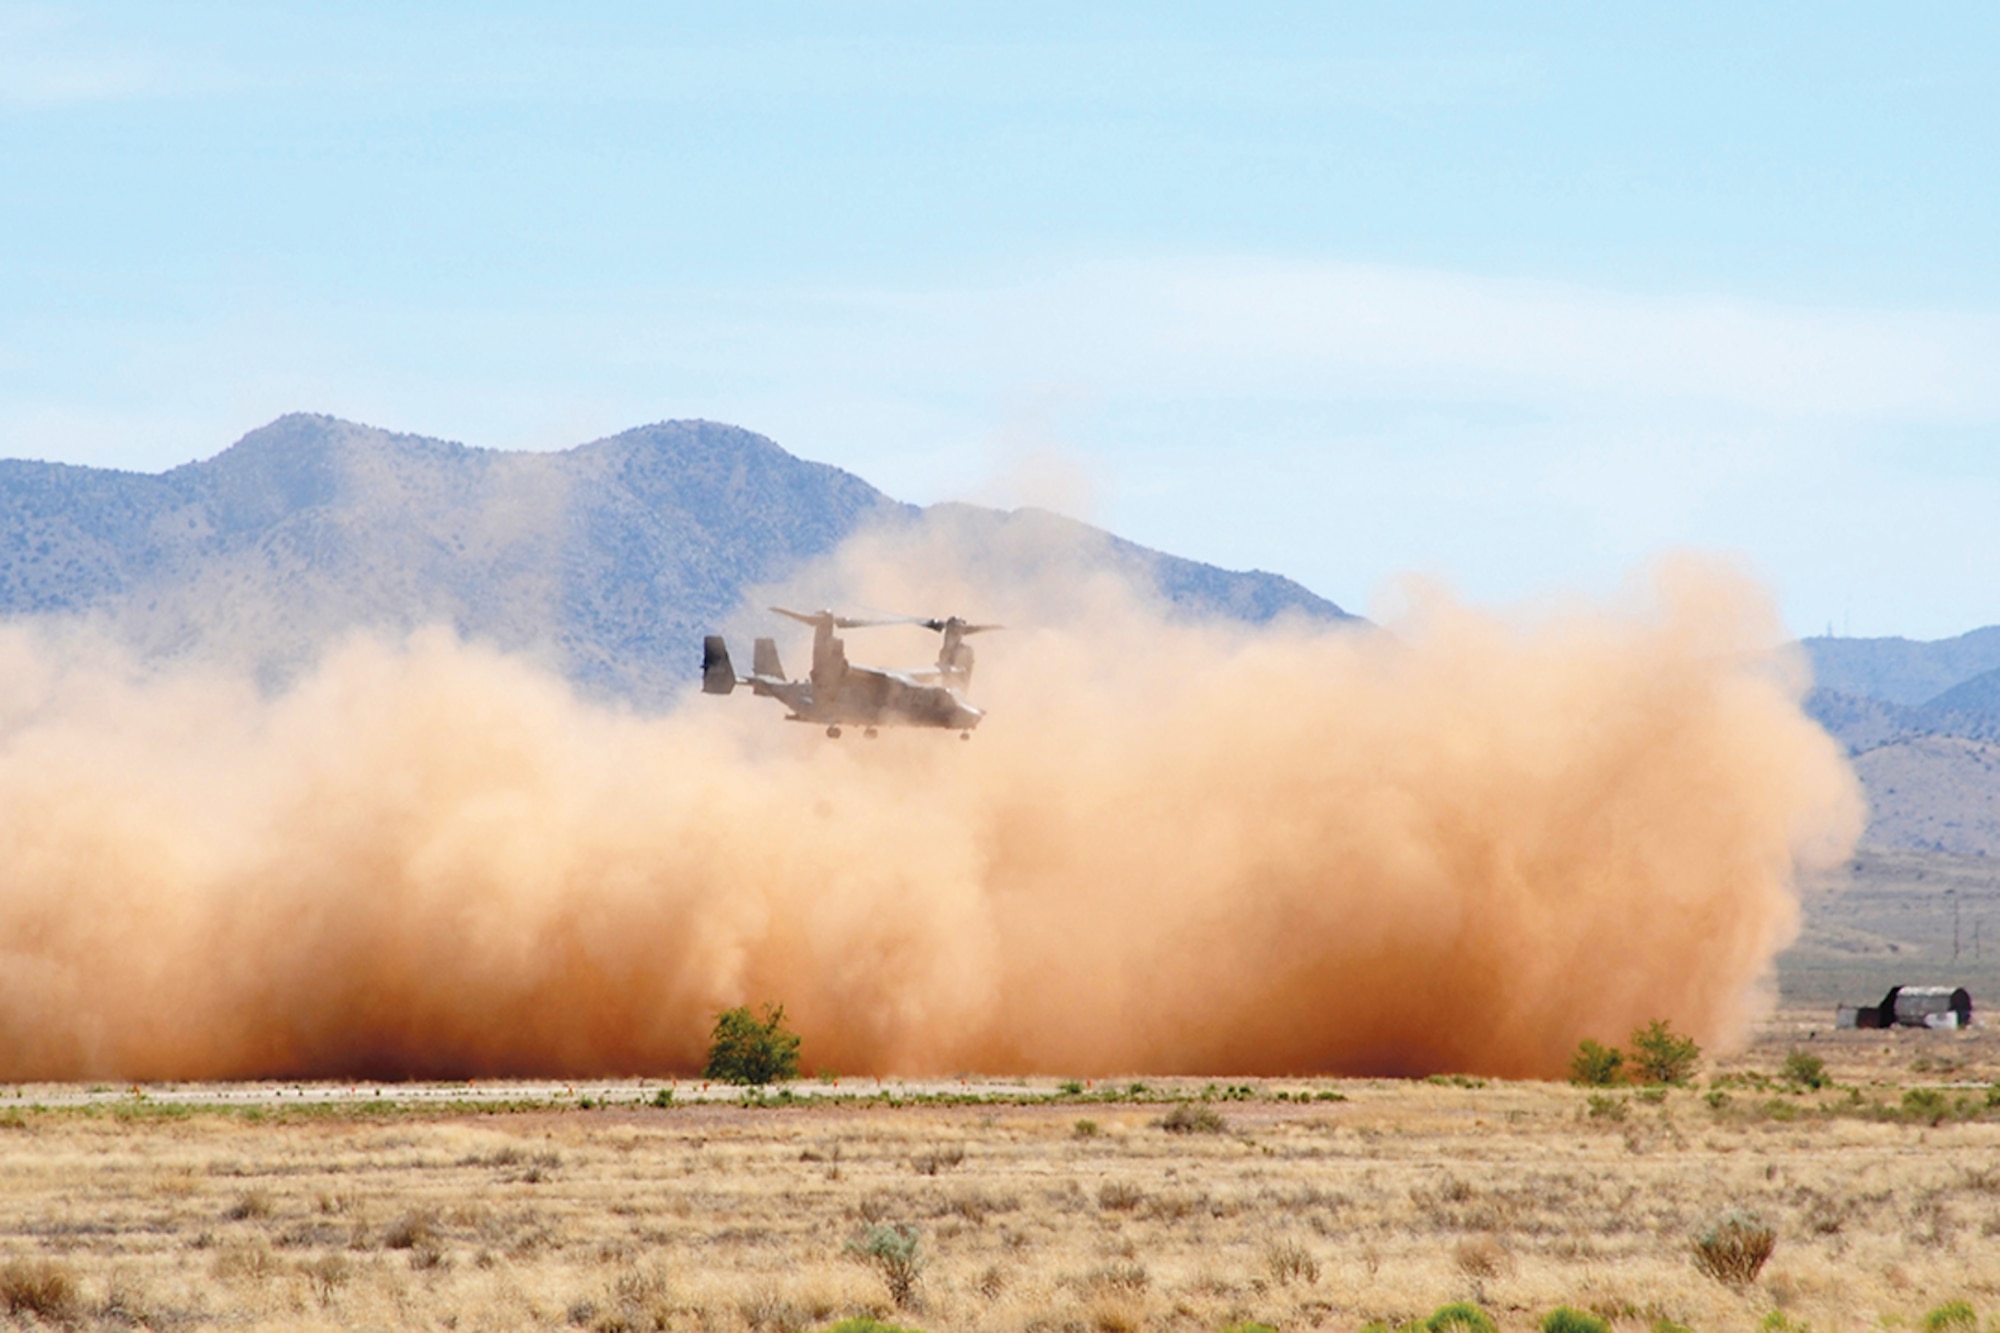 The 58th Special Operations Wing at Kirtland Air Force Base, N.M. has a plan to mitigate aircraft engine damage that happens during training missions, using a biodegradable binding material at practice landing zones. TerraLOC binds the dirt in a landing zone together so as to not stir up as much blowing dirt when a CV-22 Osprey lands there. (Courtesy photo)